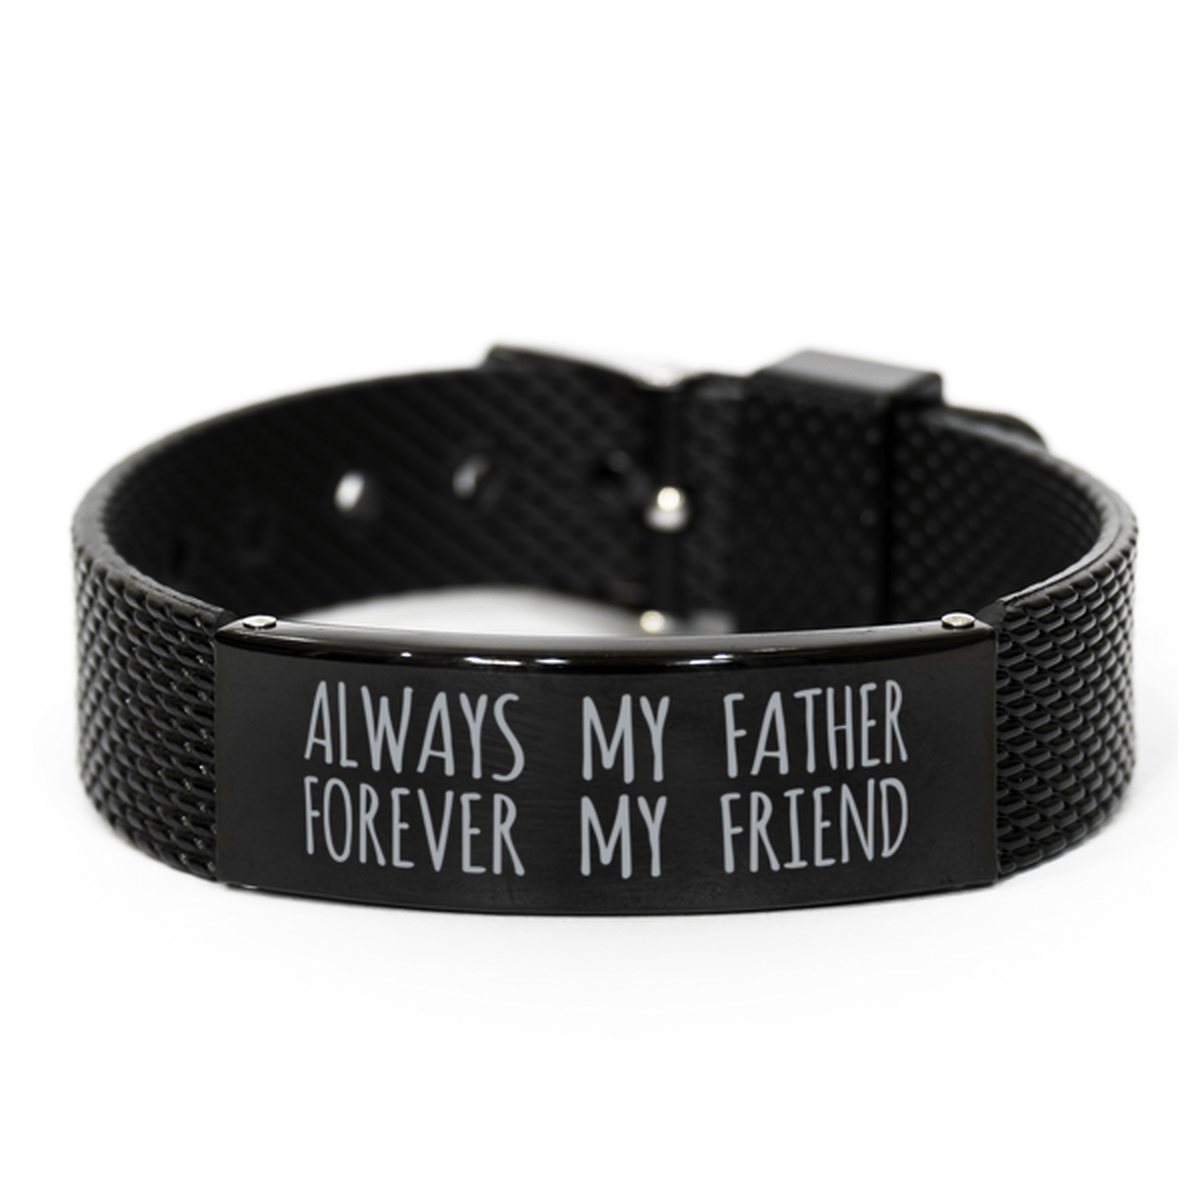 Inspirational Father Black Shark Mesh Bracelet, Always My Father Forever My Friend, Best Birthday Gifts for Family Friends